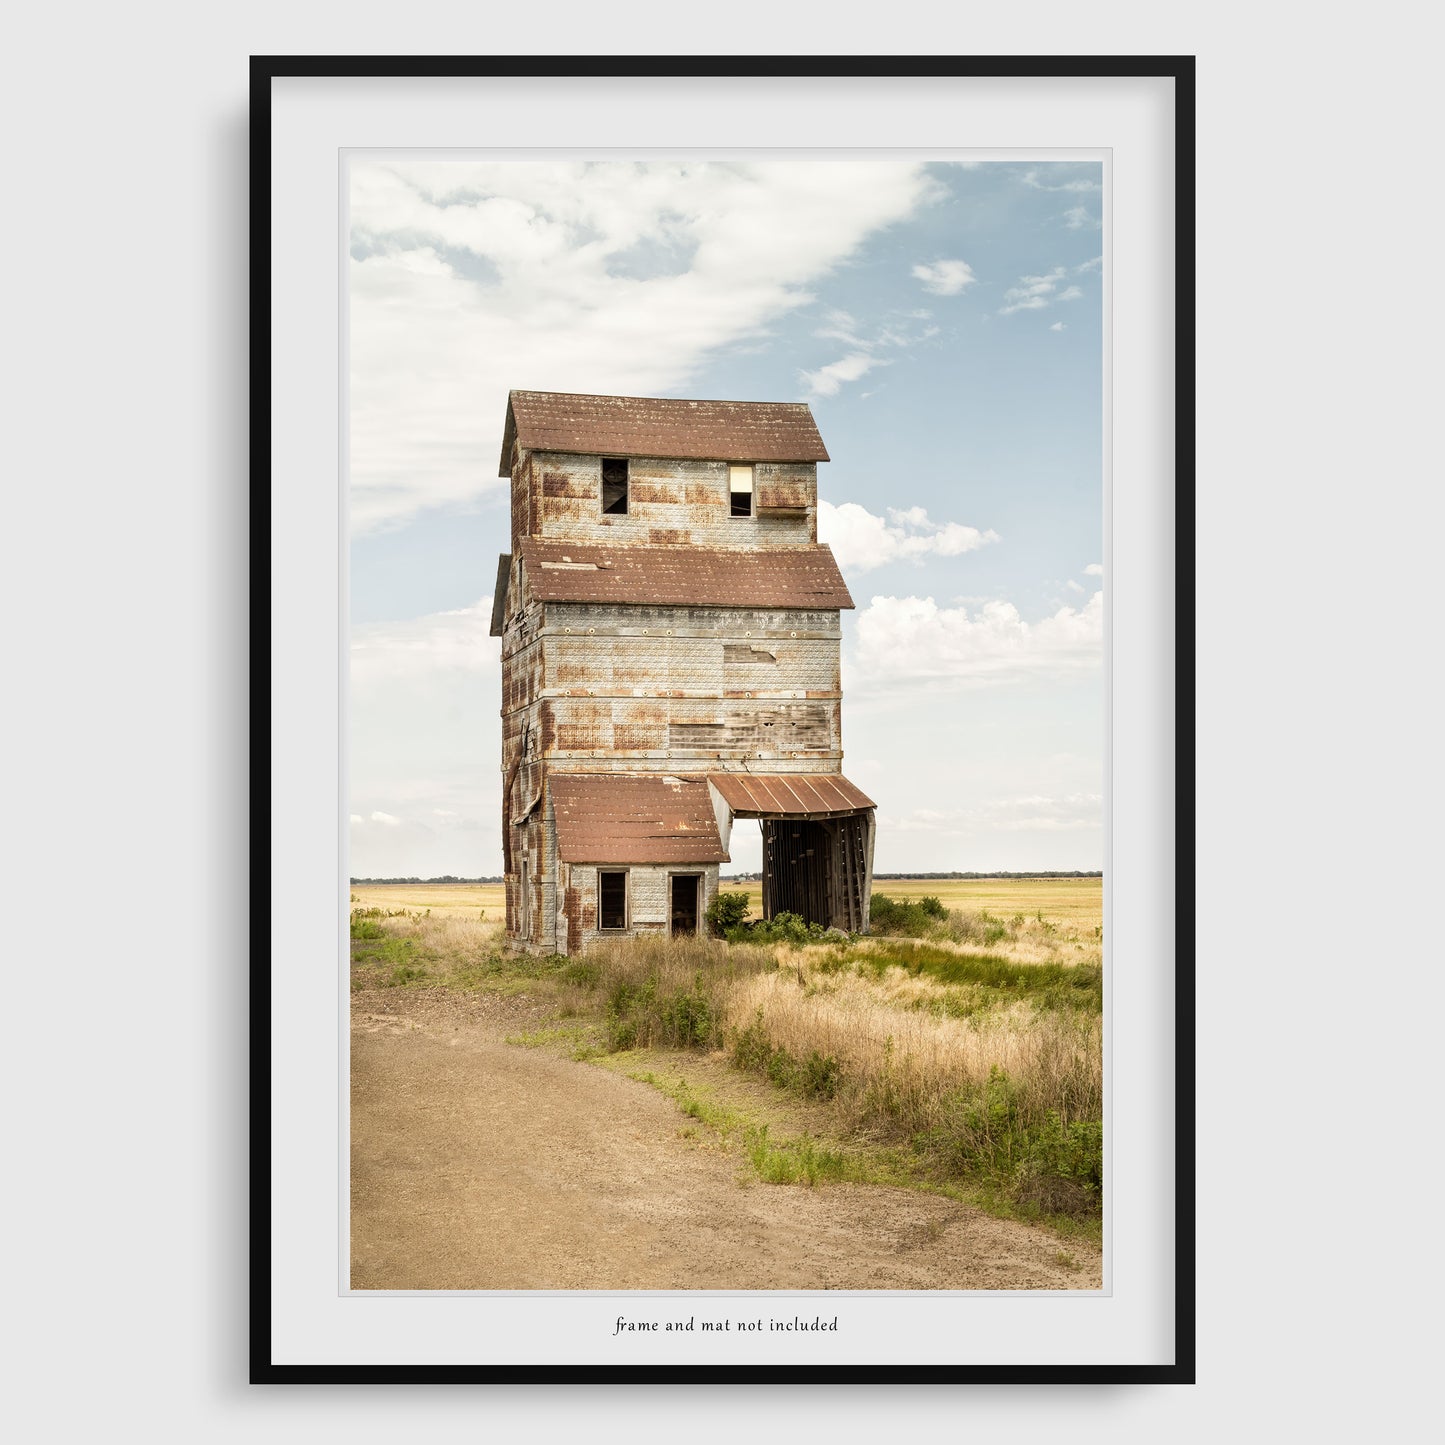 An engaging print of the Ardell grain elevator under a soft, cloud-dappled blue sky, set against the serene landscape of Kansas.